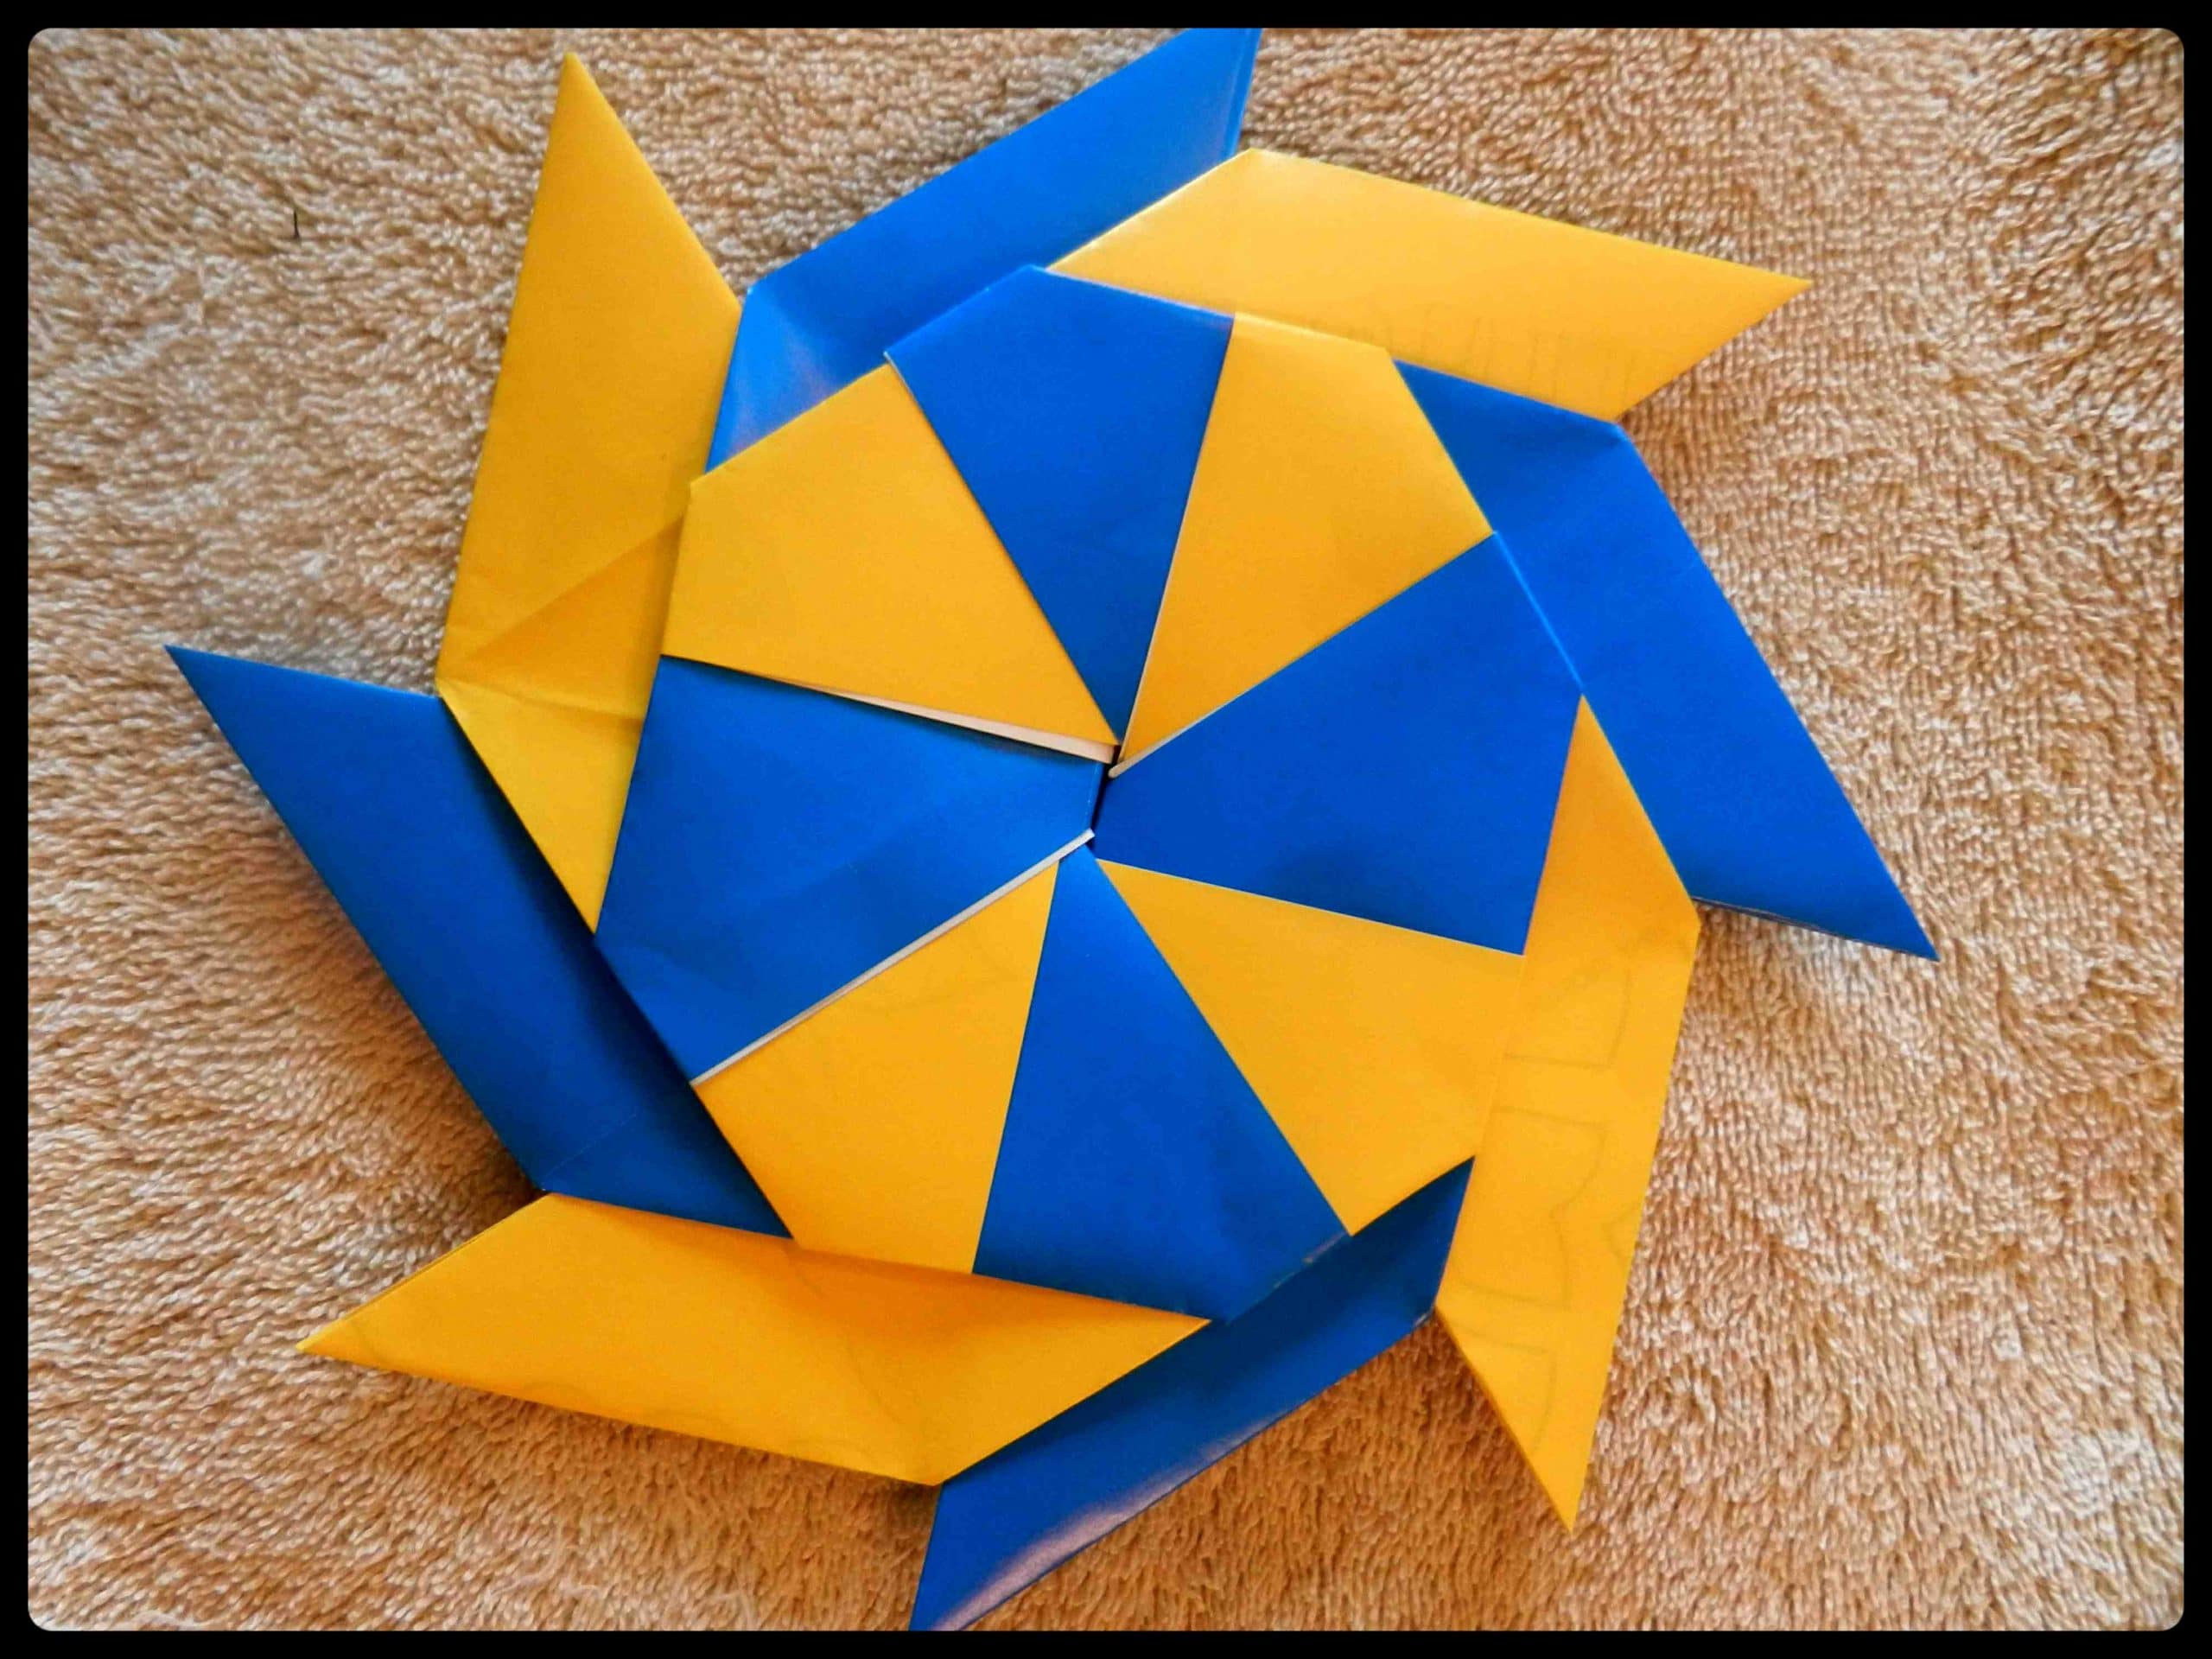 learn-critical-thinking-with-fun-with-origami-my-review-the